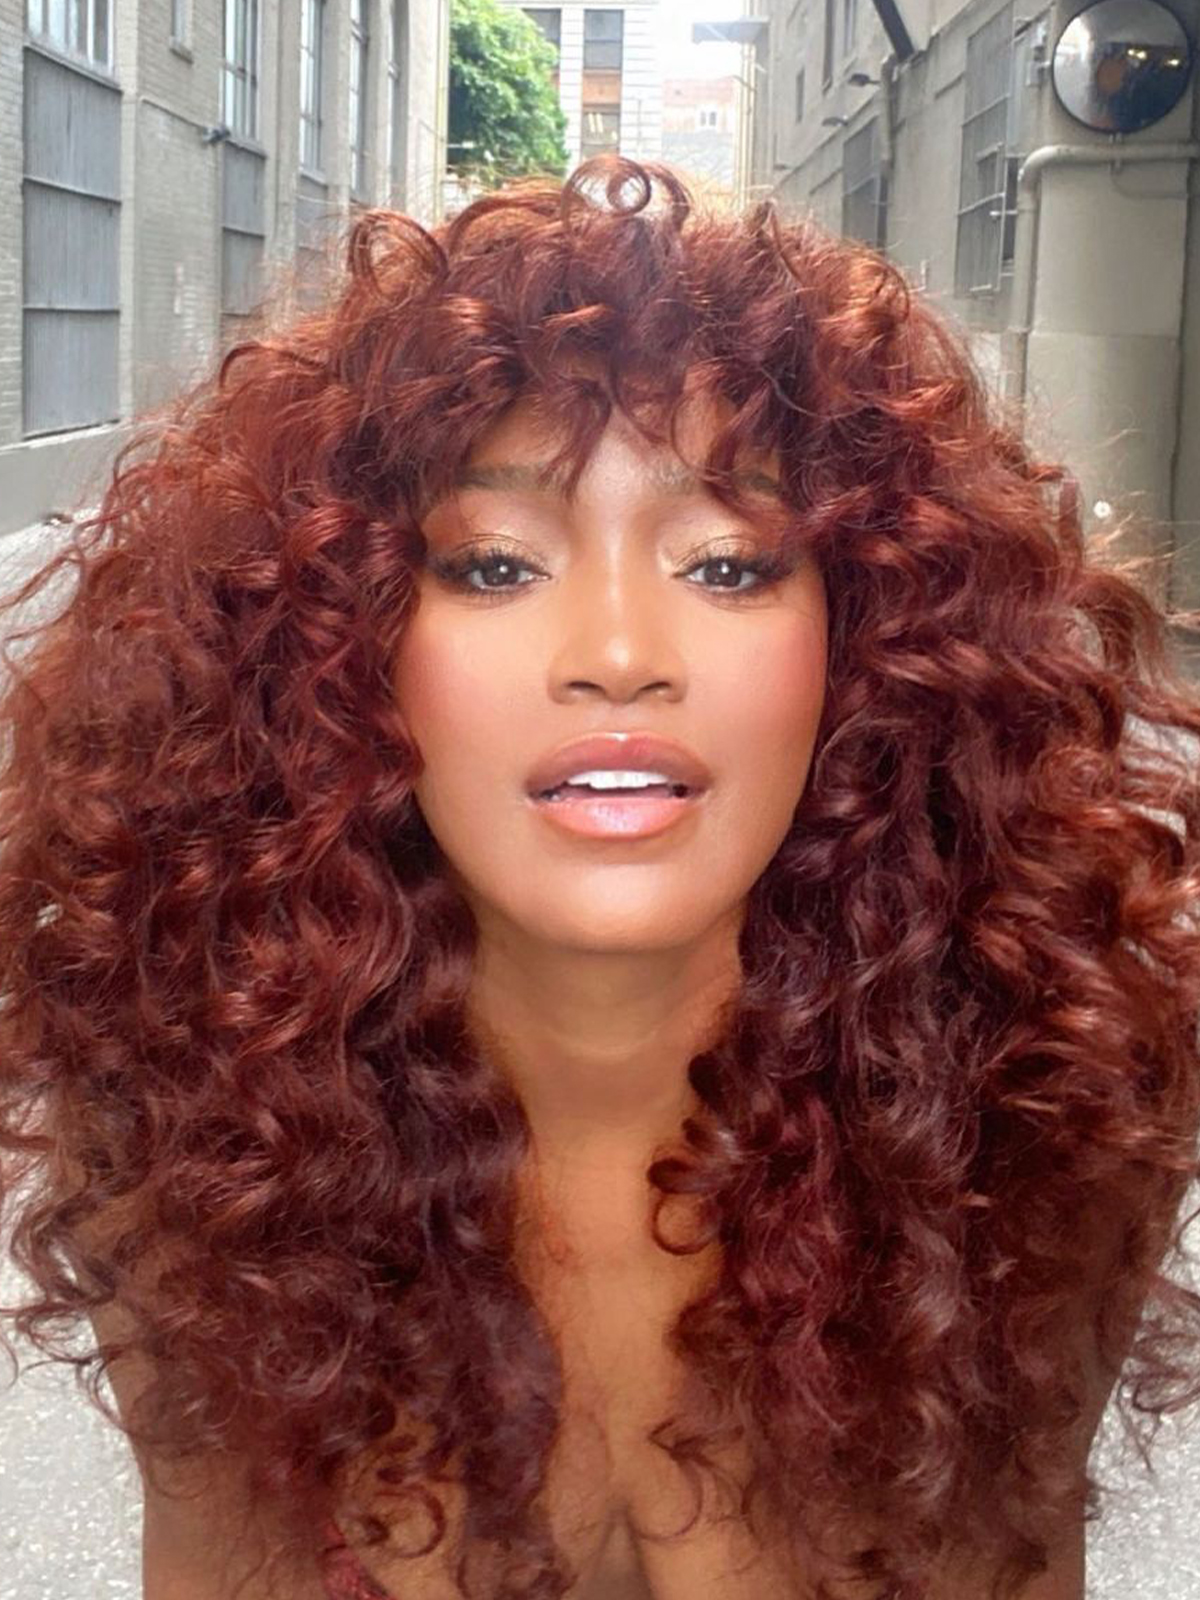 11 Best Hair Colors For Dark Skin Tones Who What Wear Uk